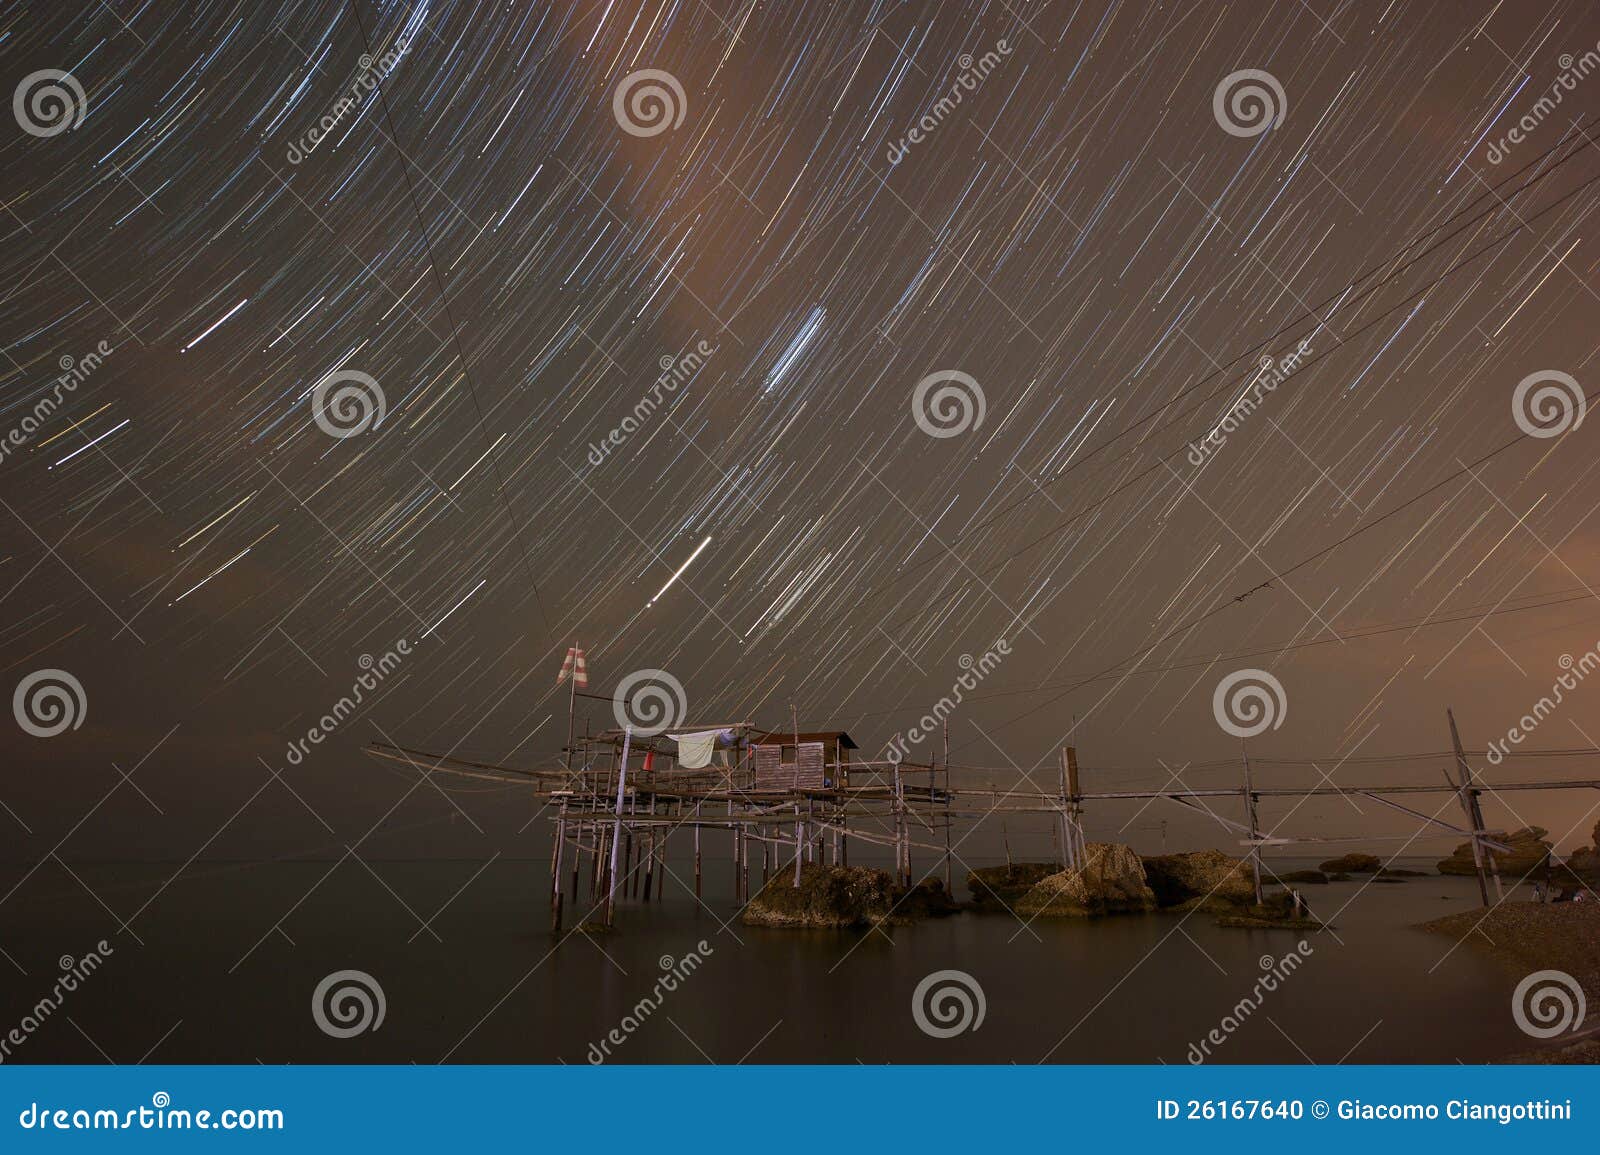 startrail above the trabocco of punta torre